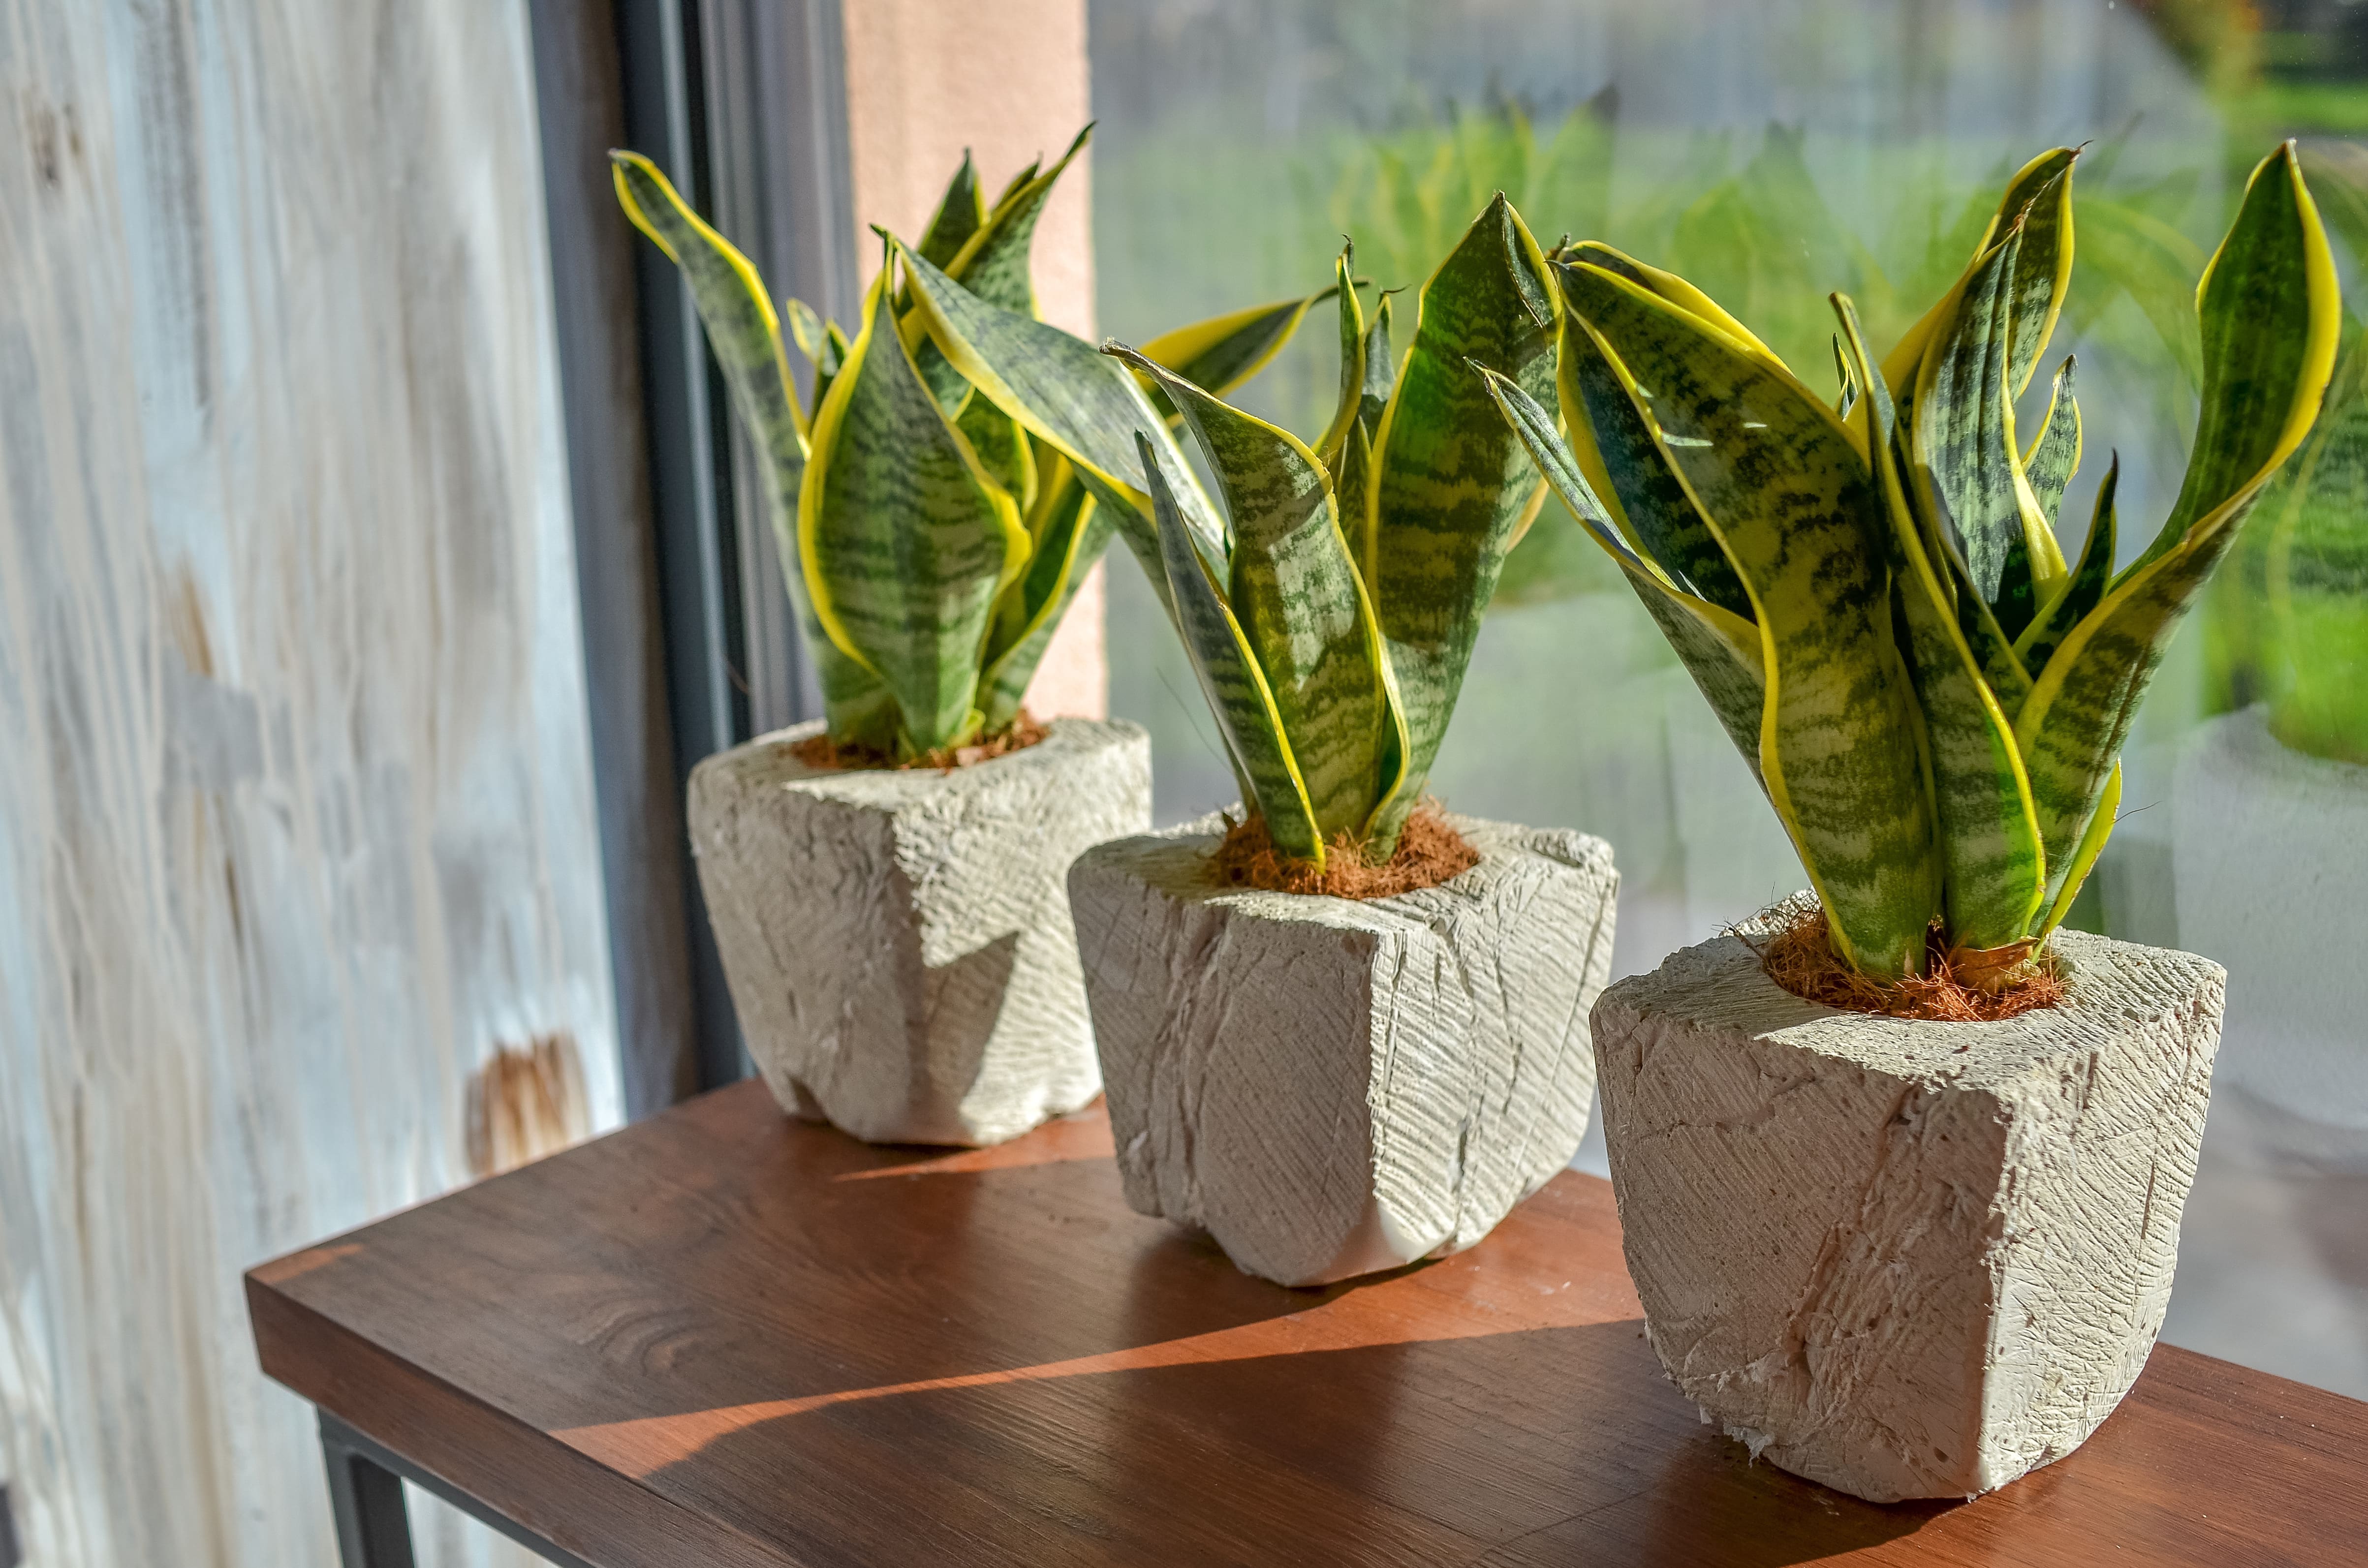 Three potted snake plants in distressed concrete planters lined up beside a sunny window indoors